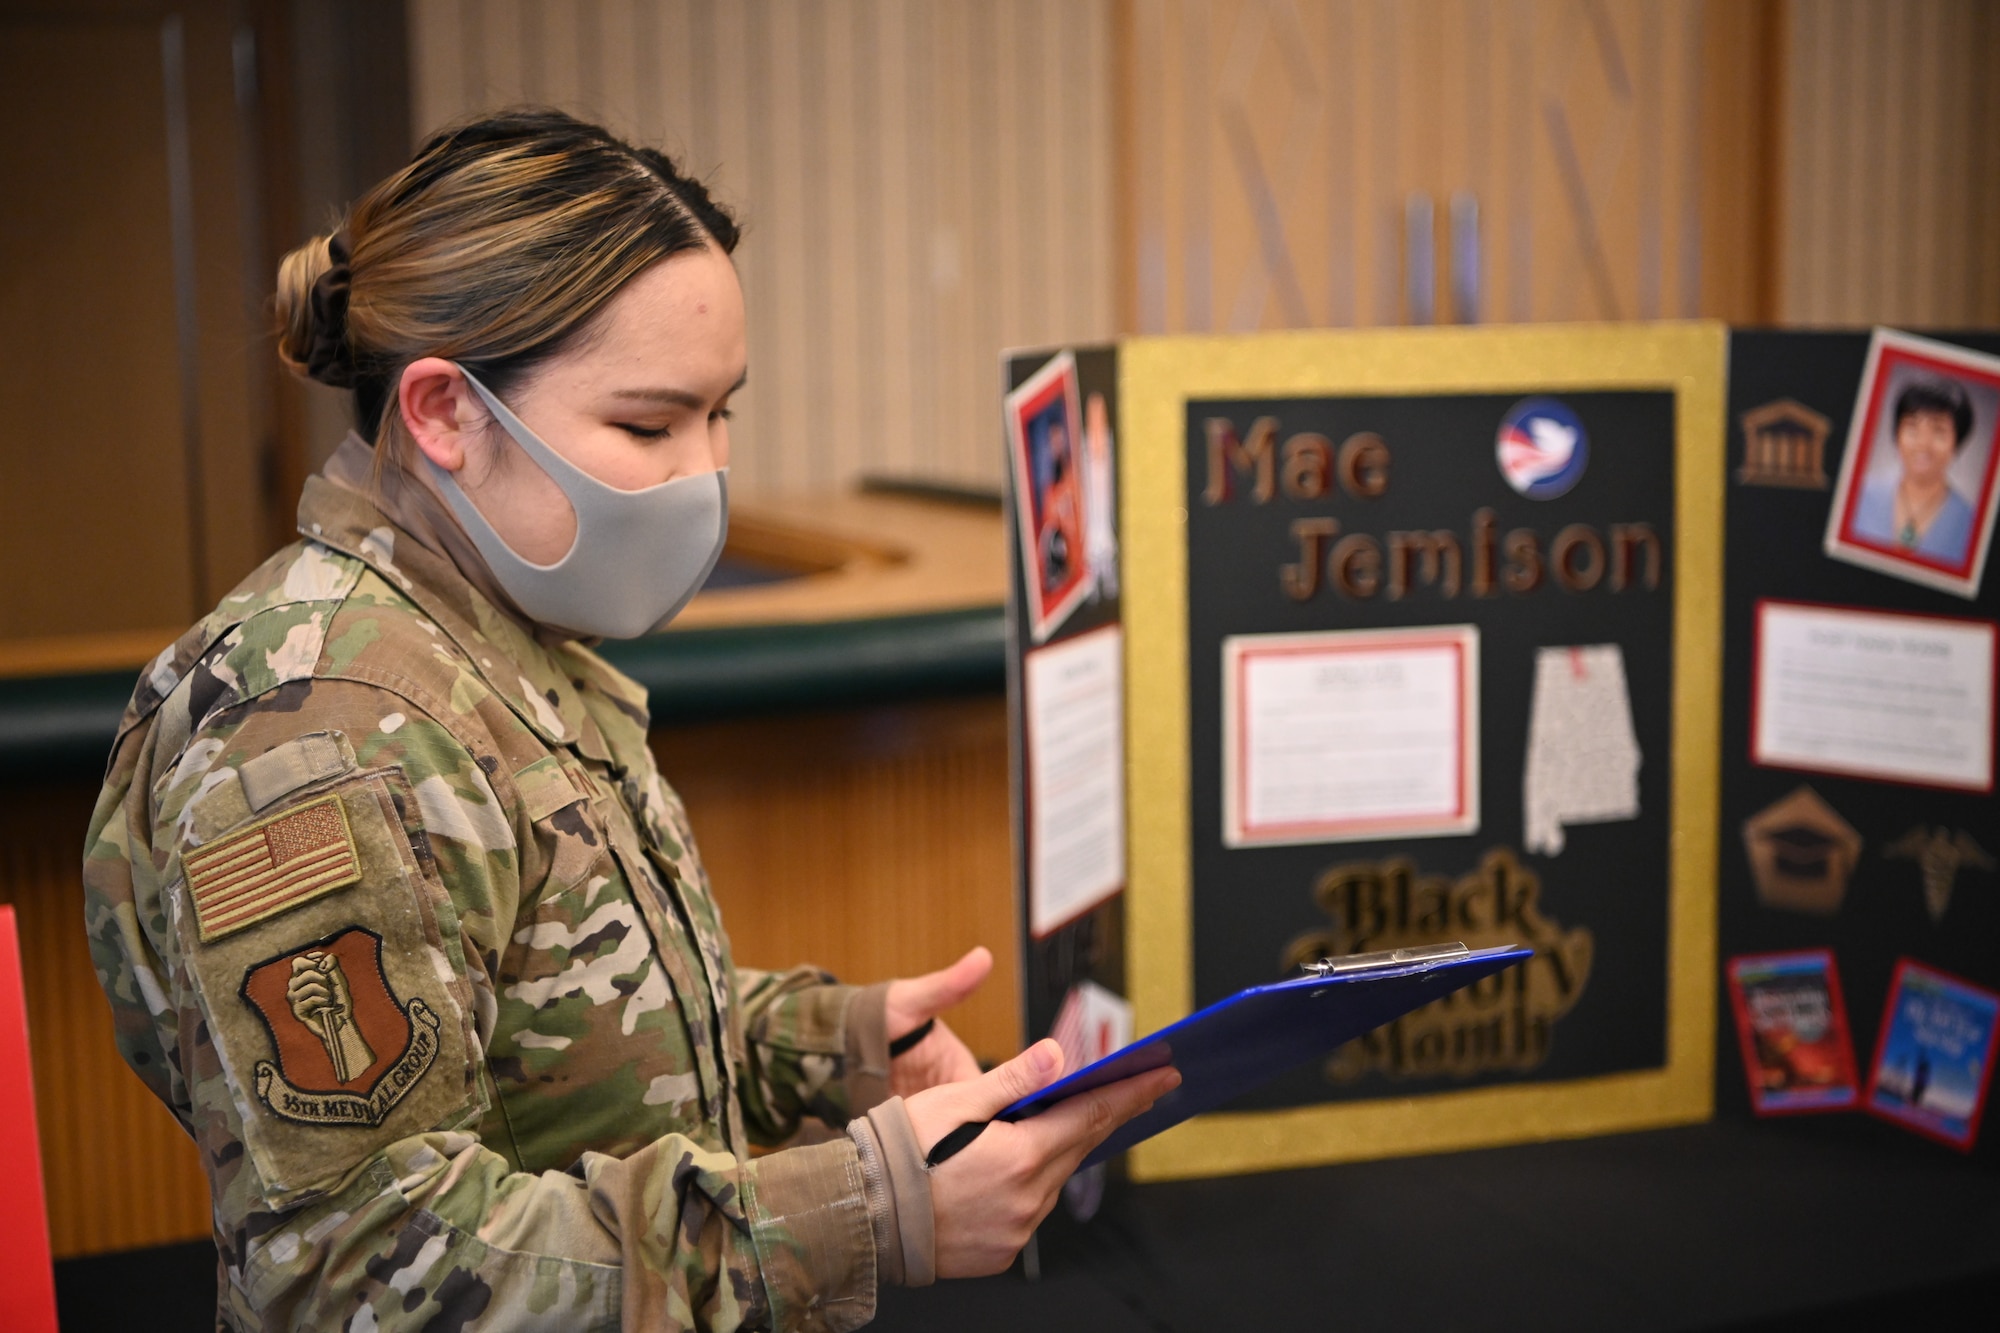 Women in uniform looks at notebook while presenting a display.